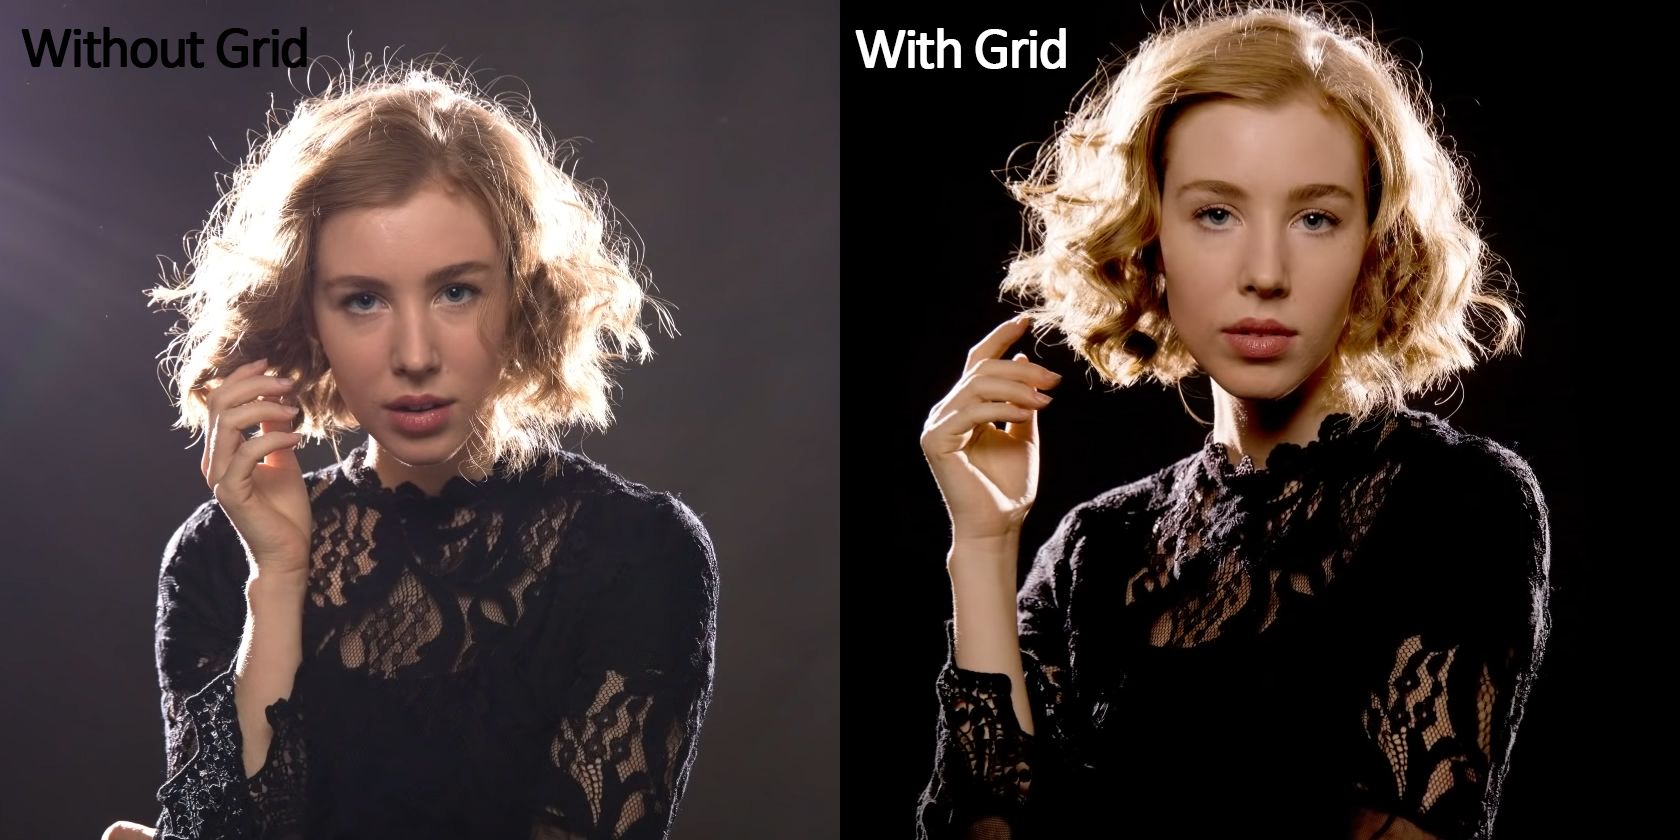 light falloff and lens flare on image without grid vs with grid